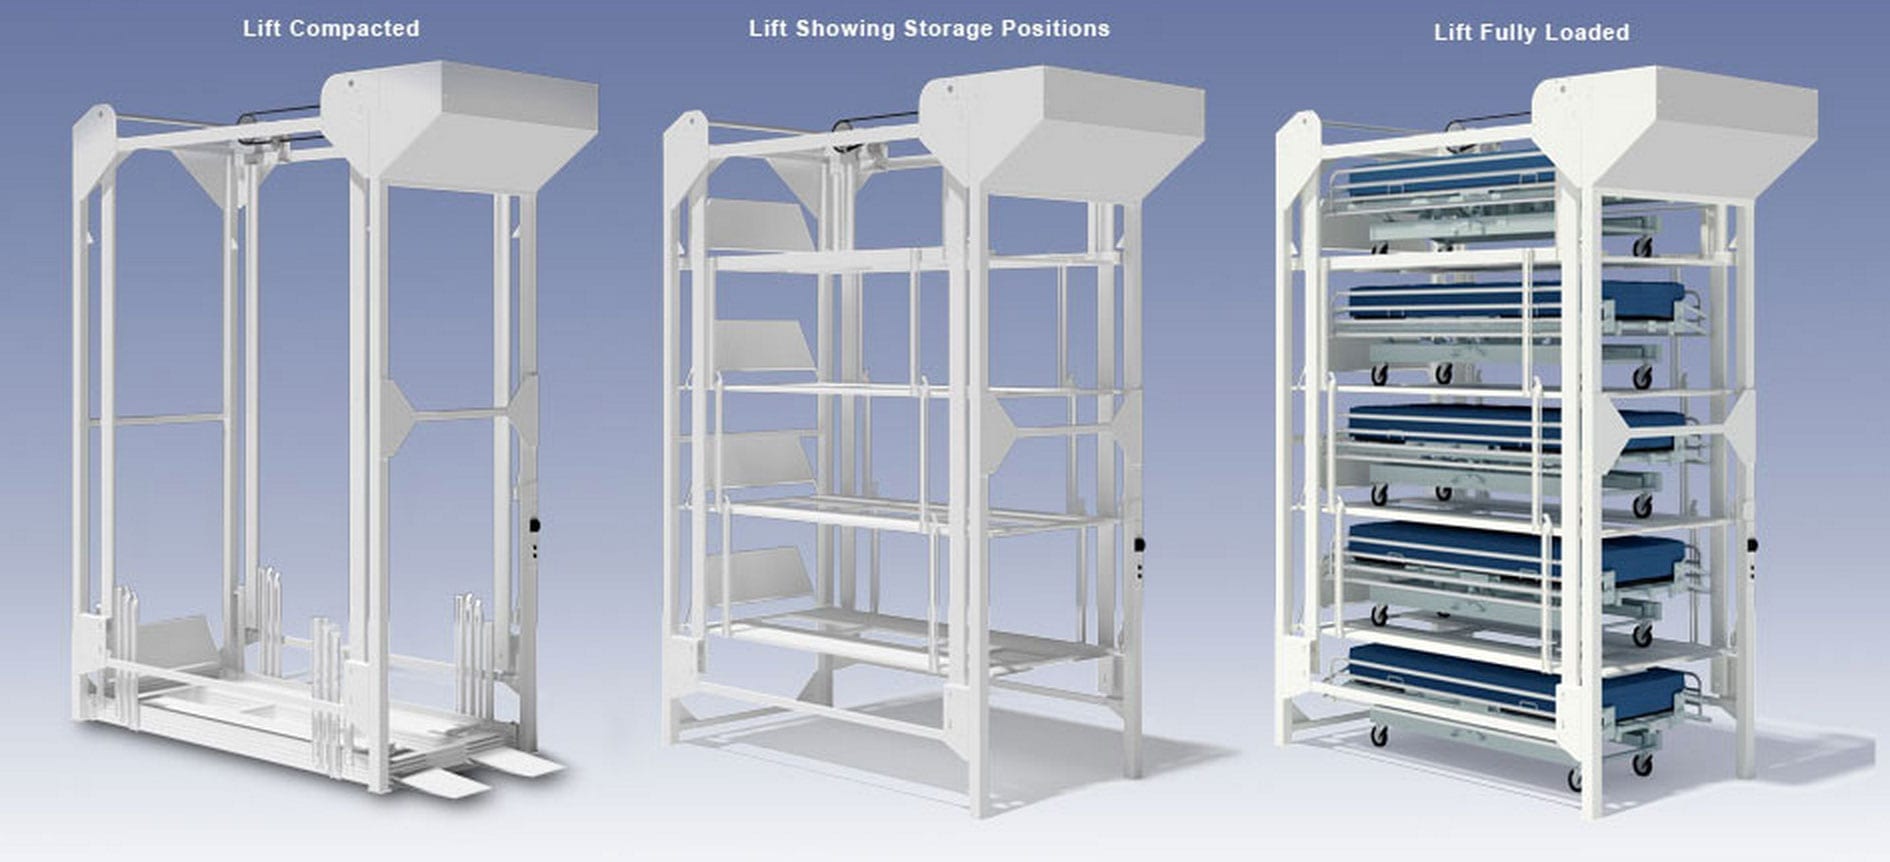 Bed Lifts for Hospital Bed Storage Solutions - Patterson Pope